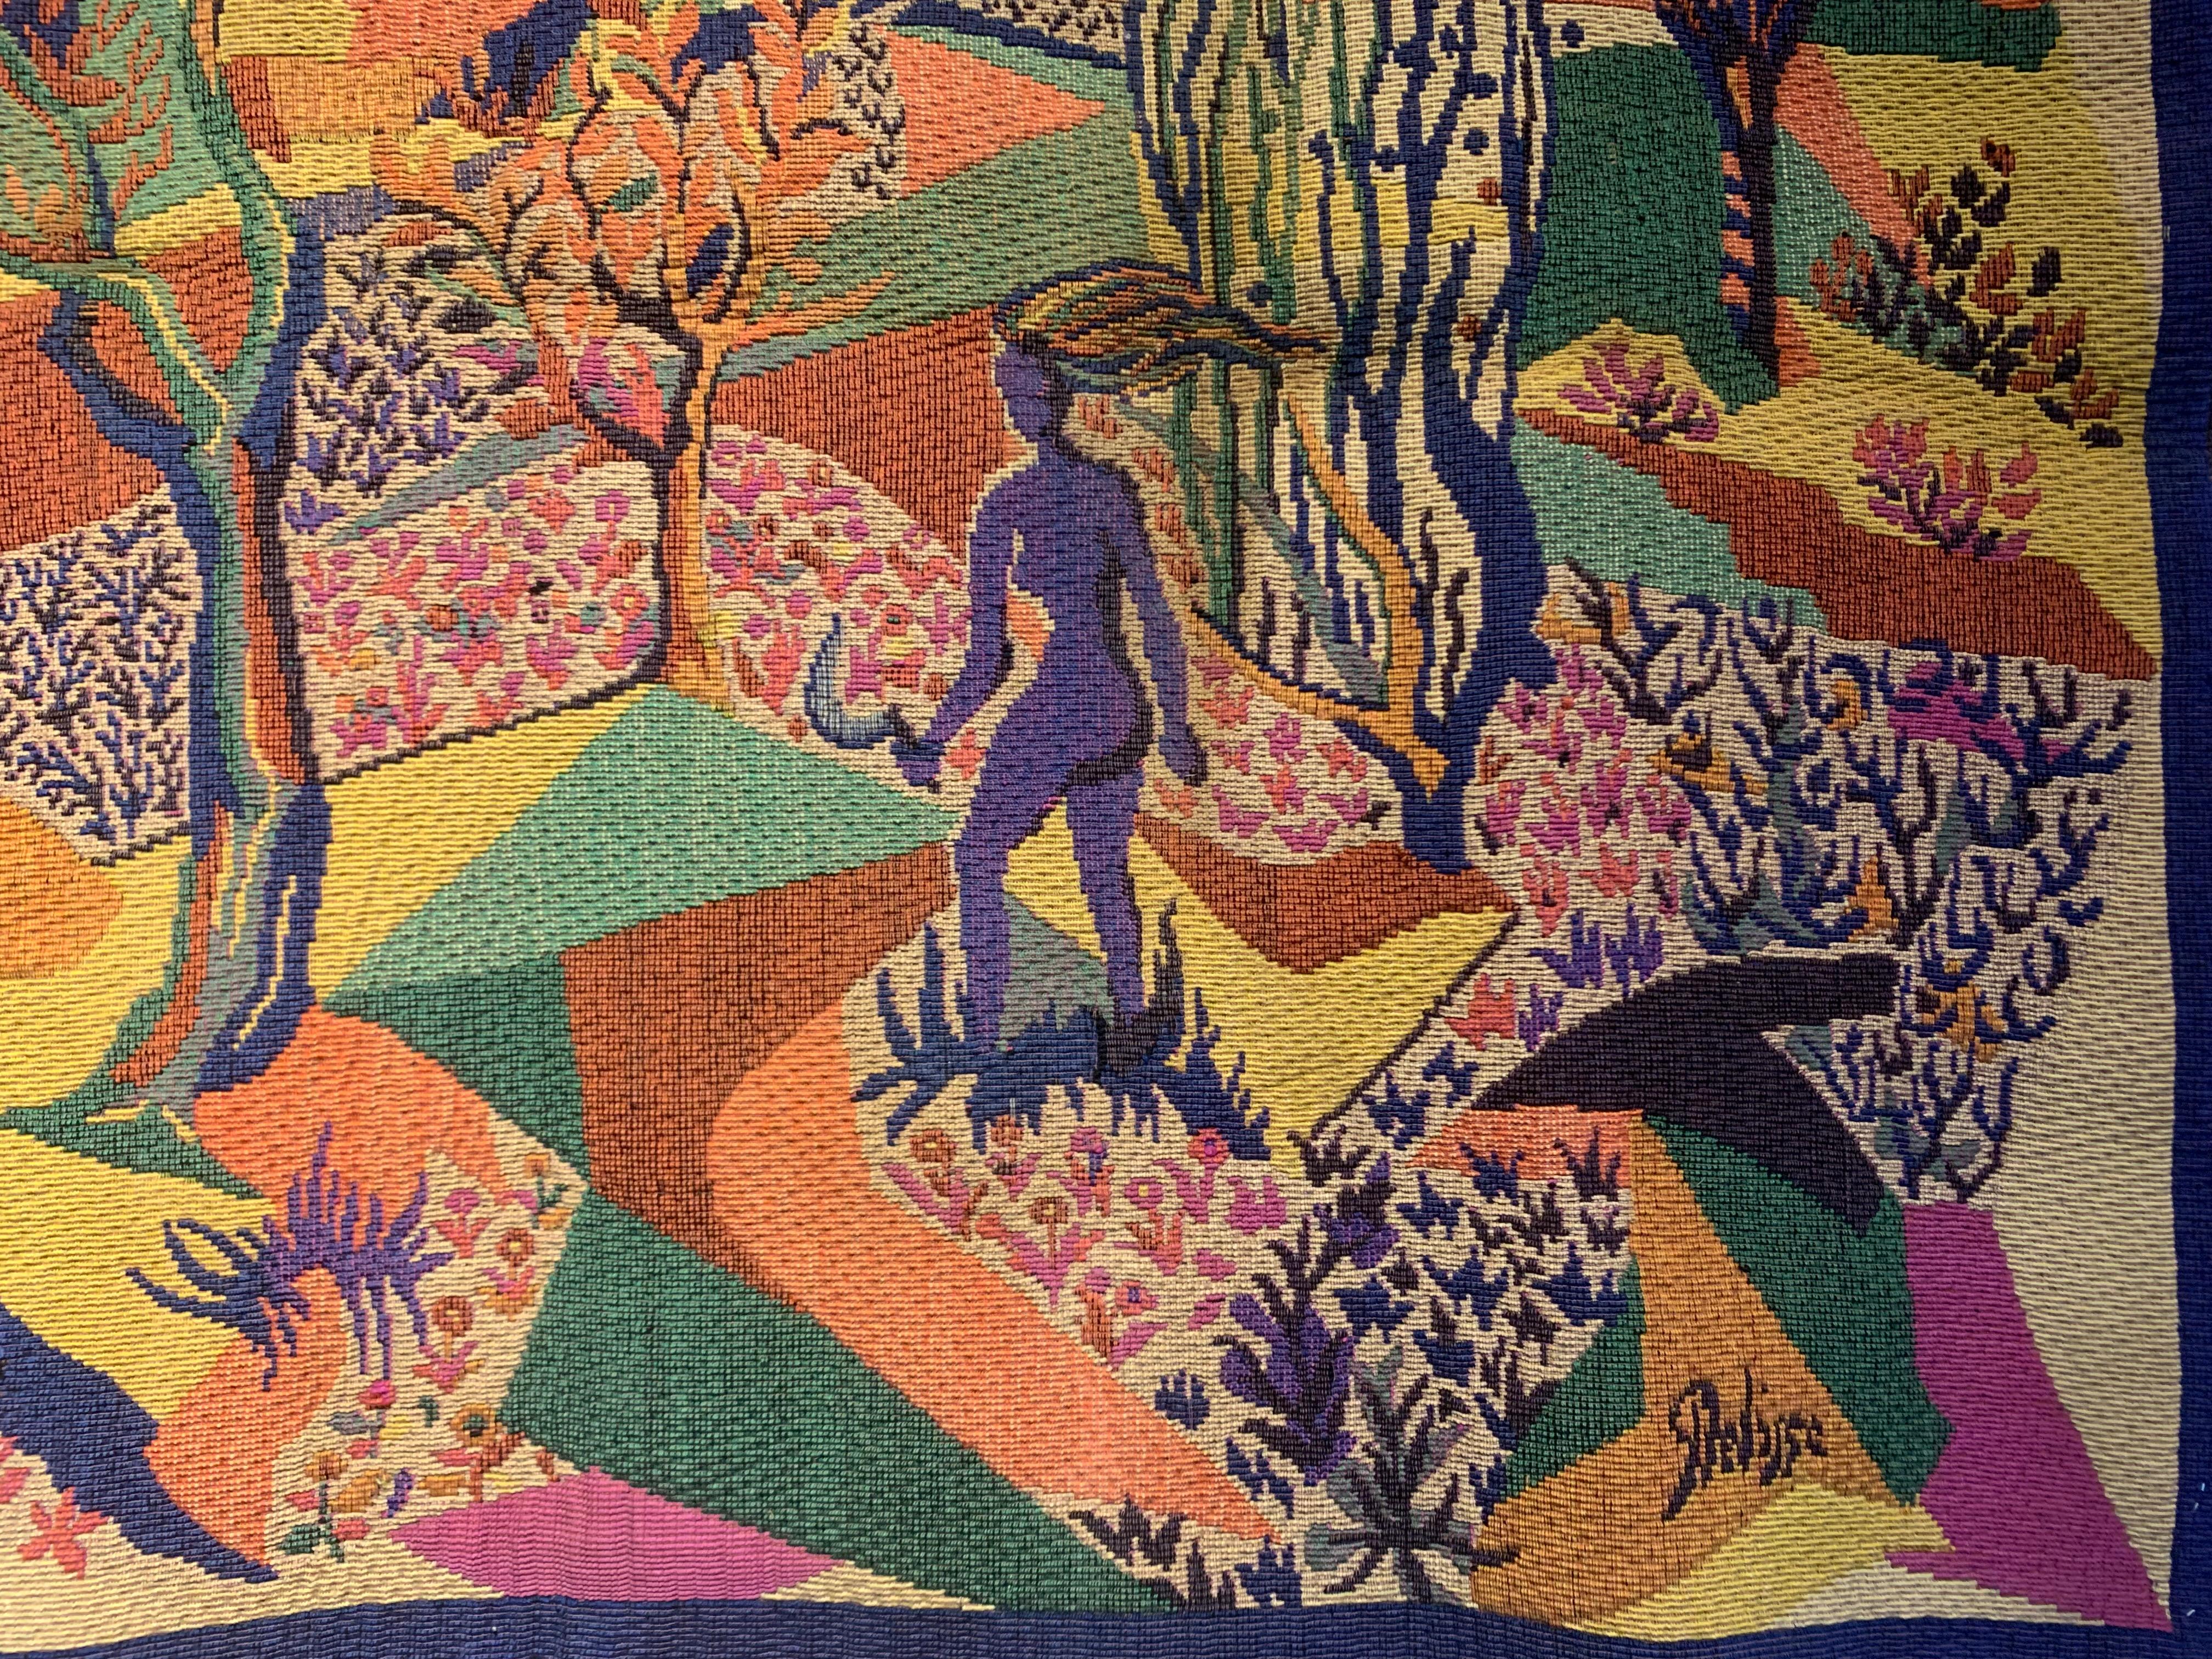 Woven Late-19th Century Tapestry “La Druidesse ” Signed  For Sale